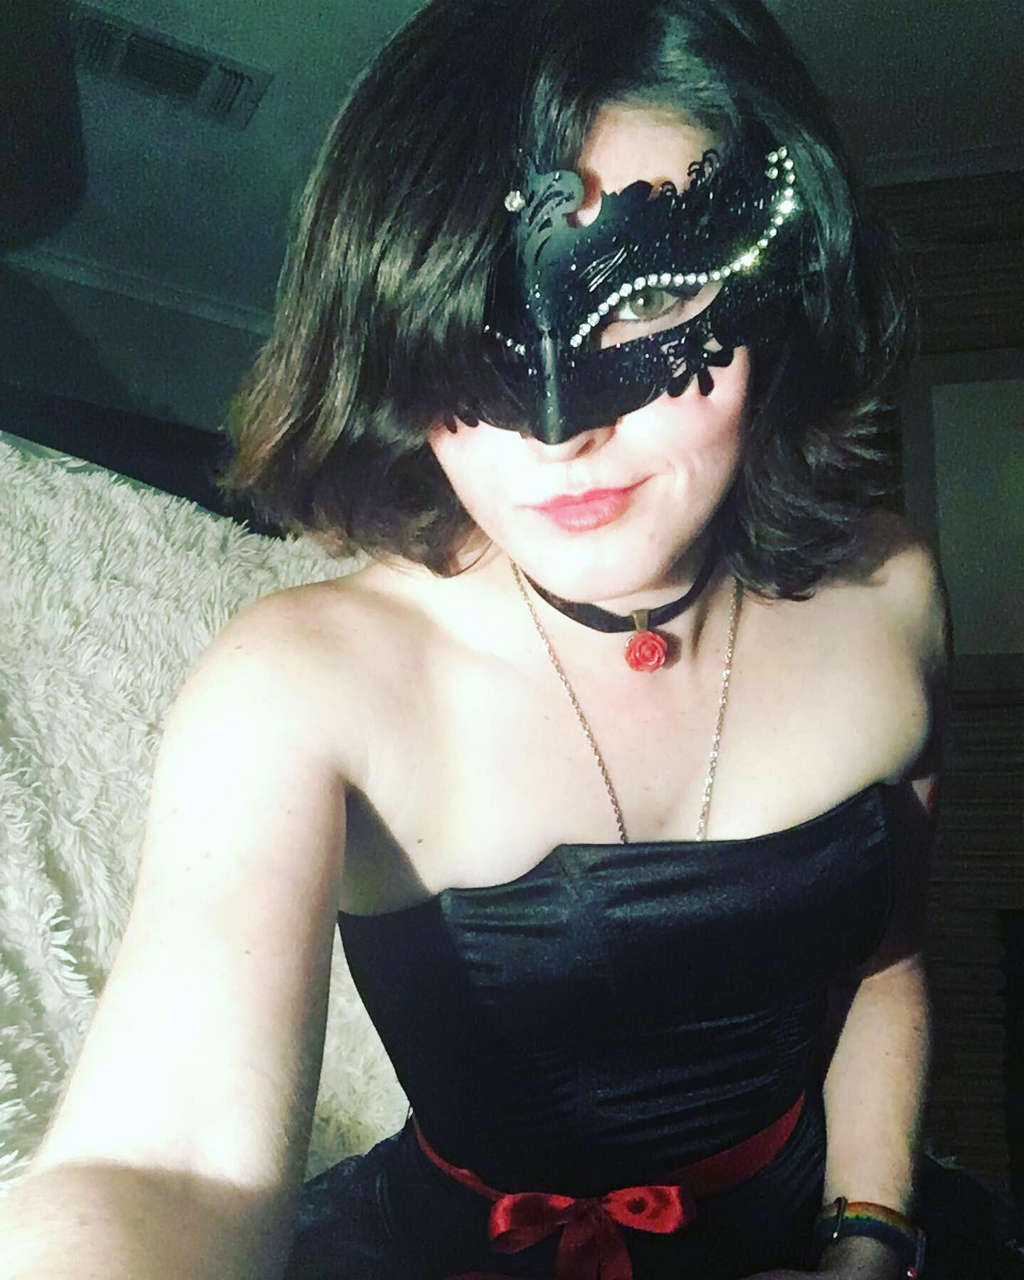 Loved Attending A Murder Mystery Masquerade Dinner With Friend